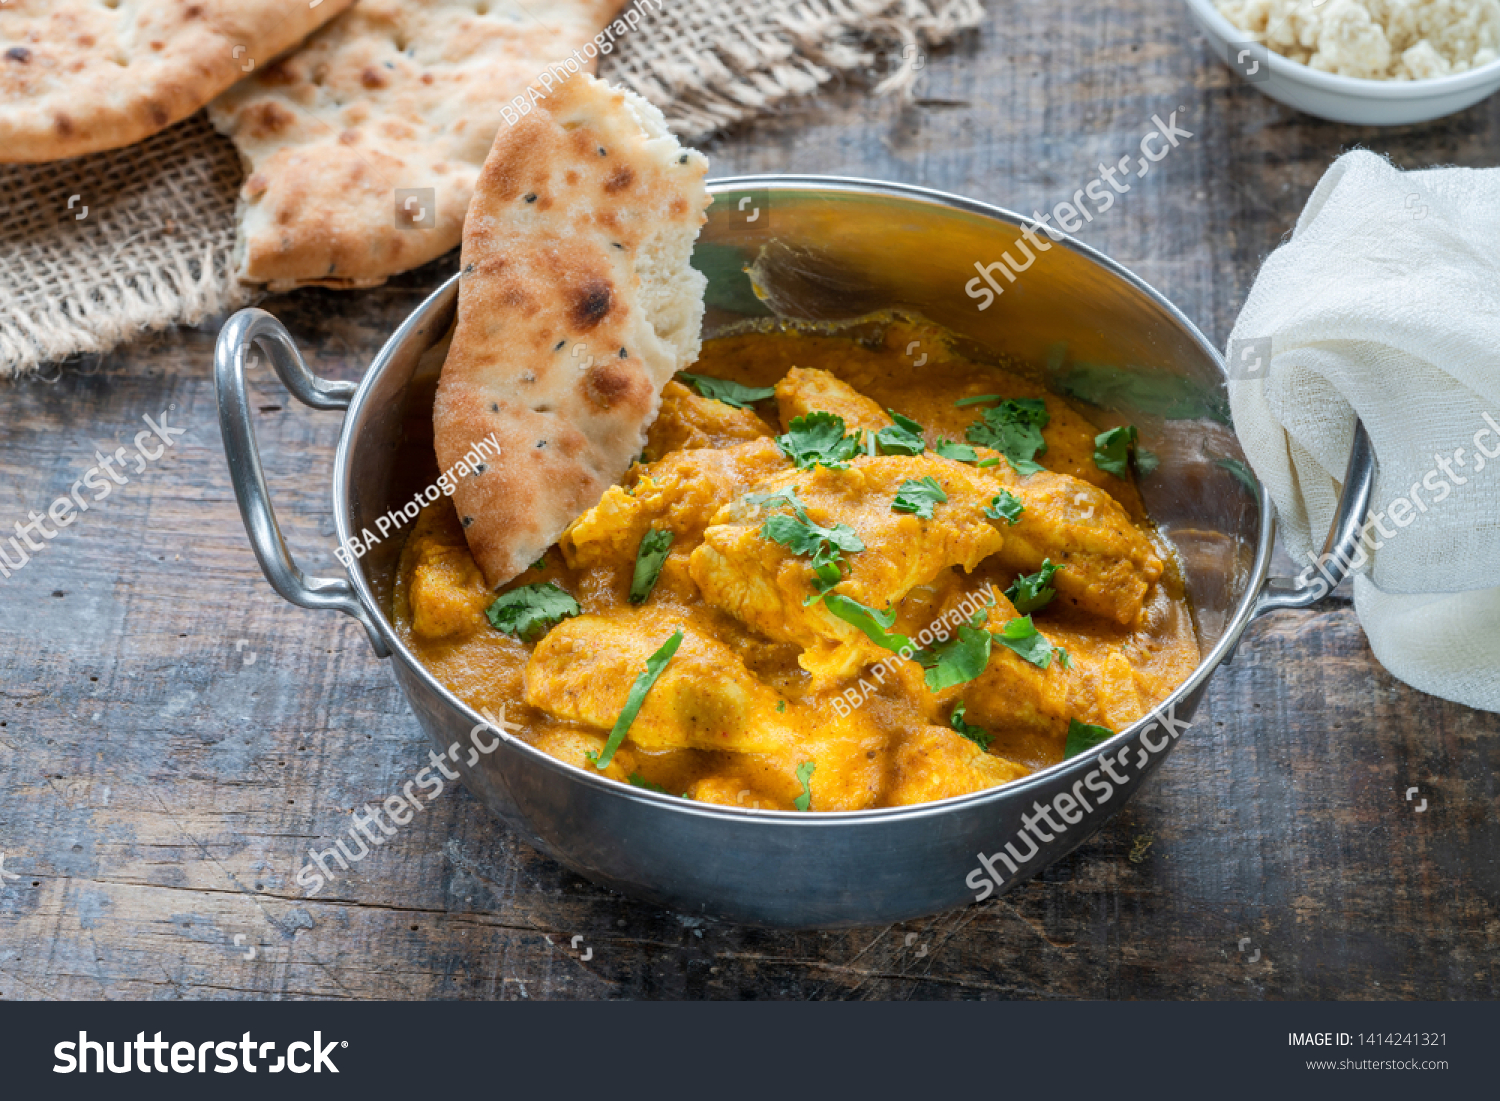 Chicken korma curry with naan bread - high angle view #1414241321